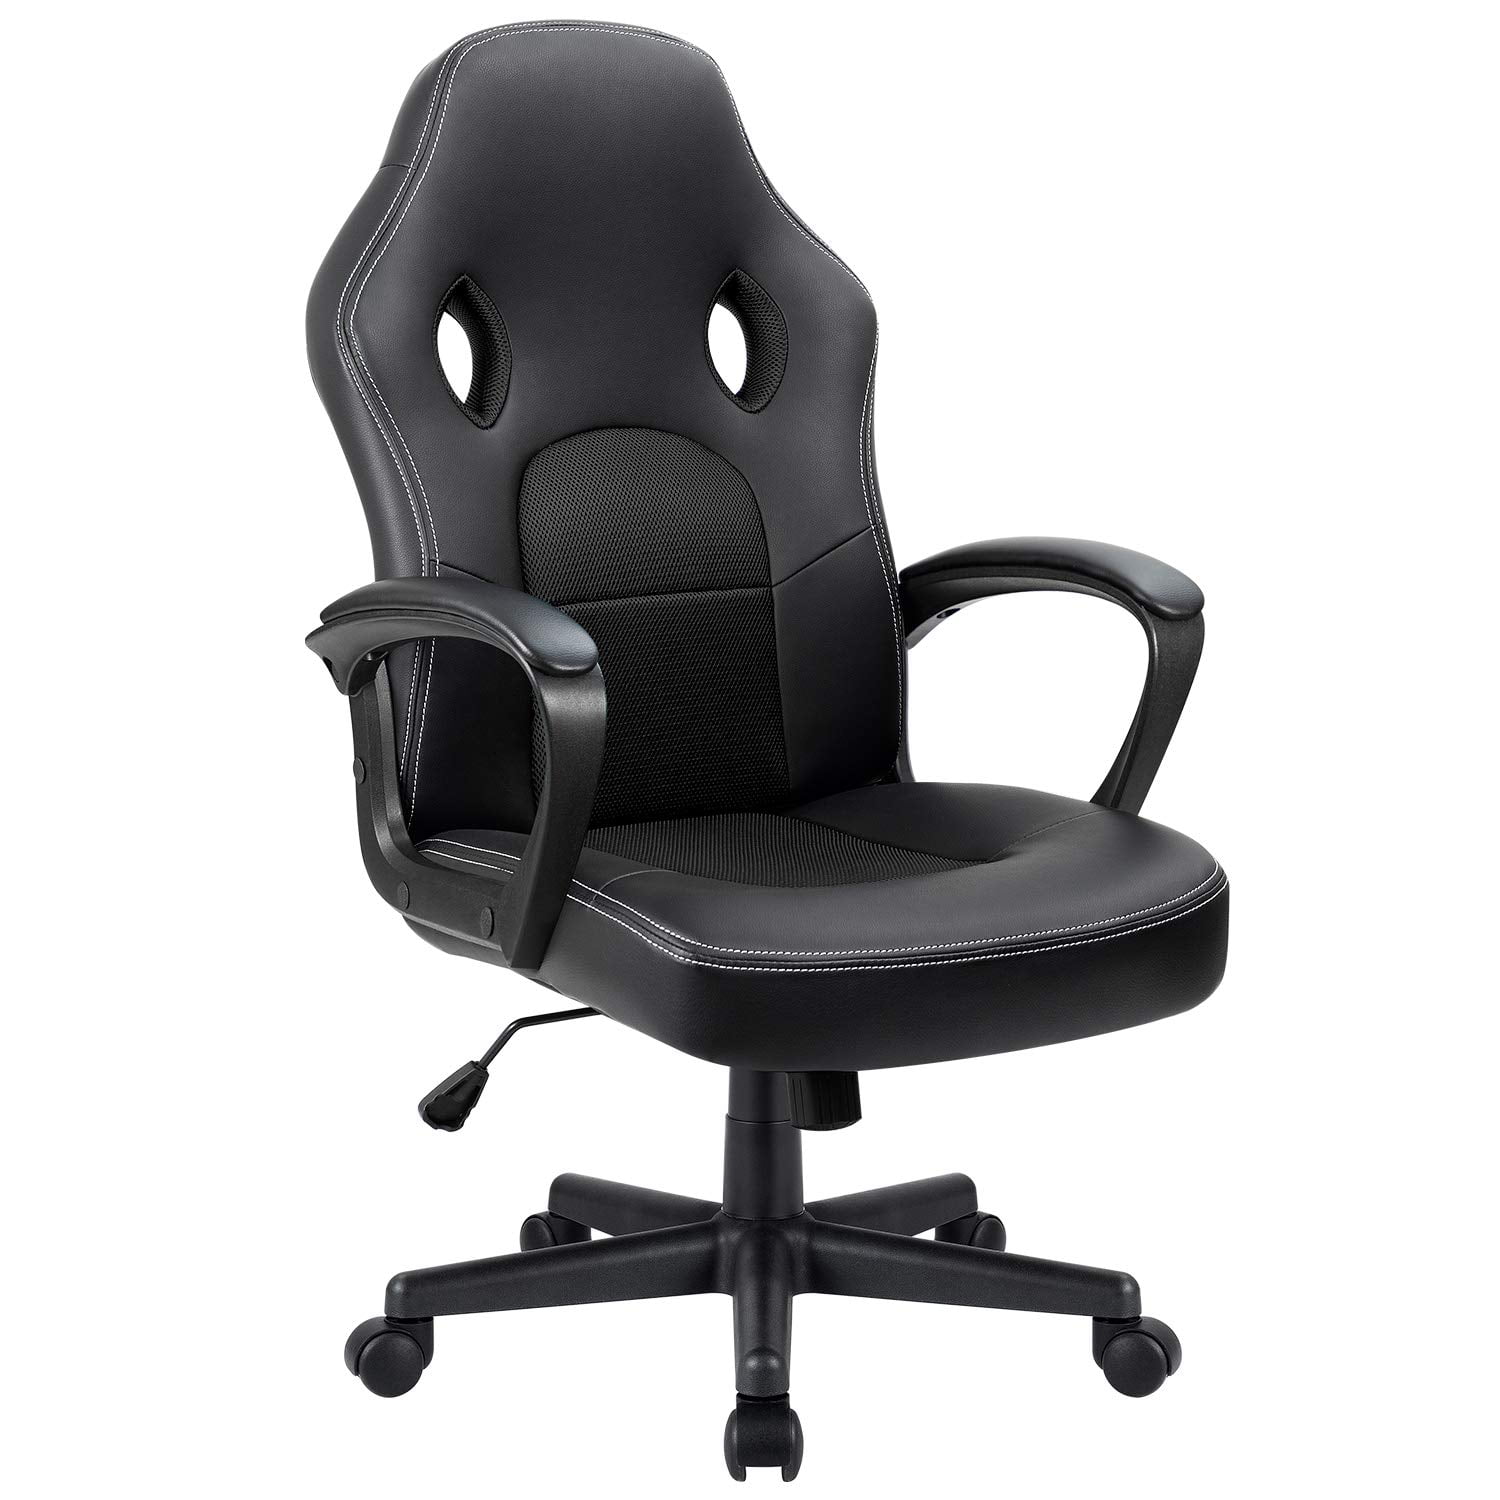 Furmax Best Gaming Chair under 200 with High Back